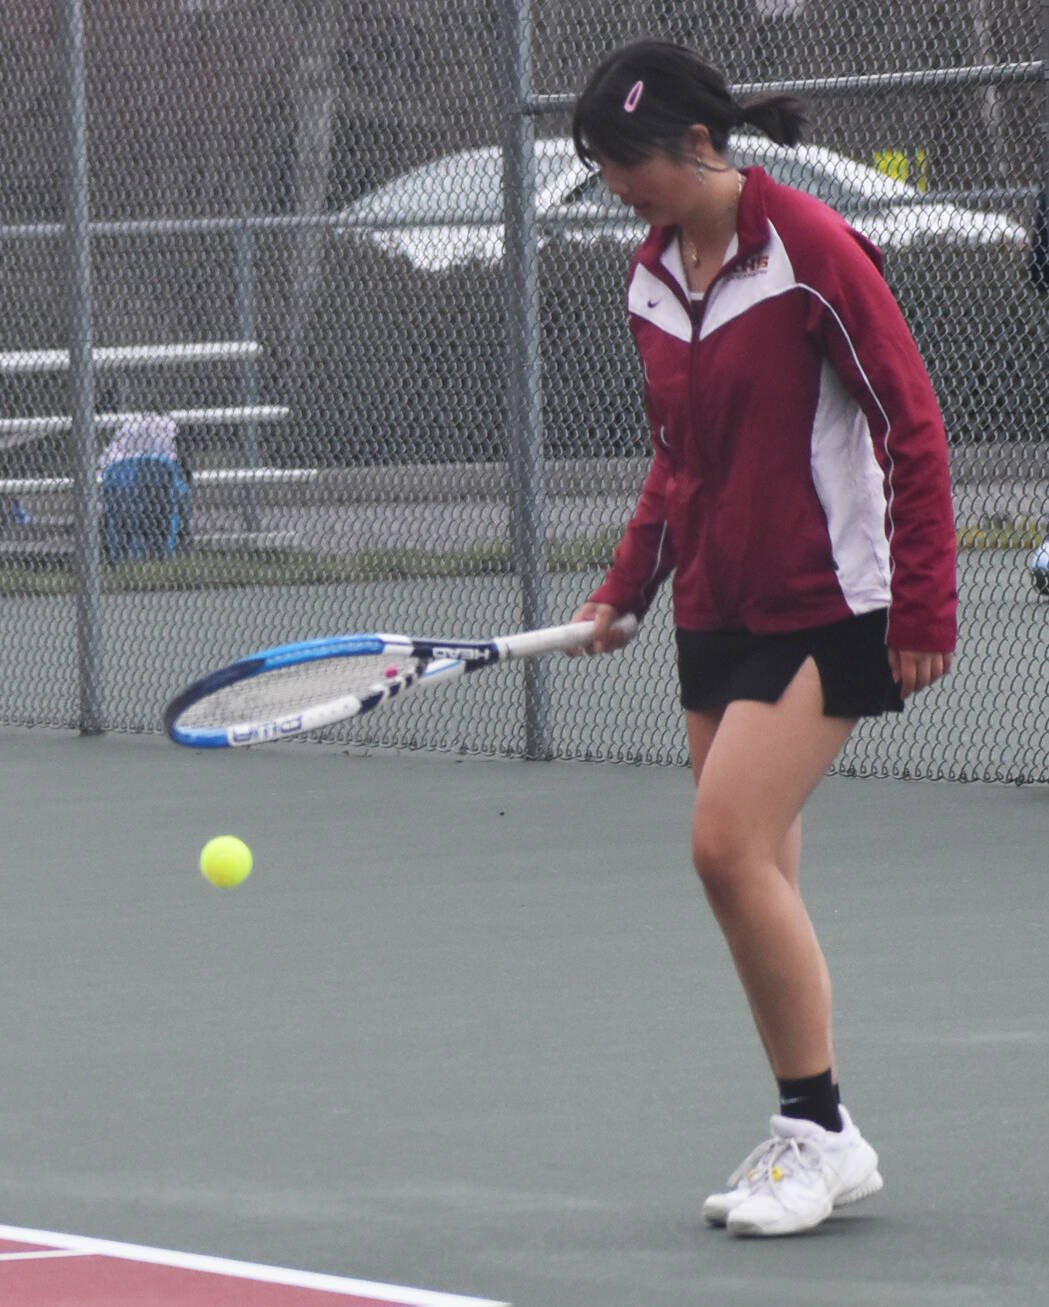 Izzy Kim plans to serve the ball in the only singles match.